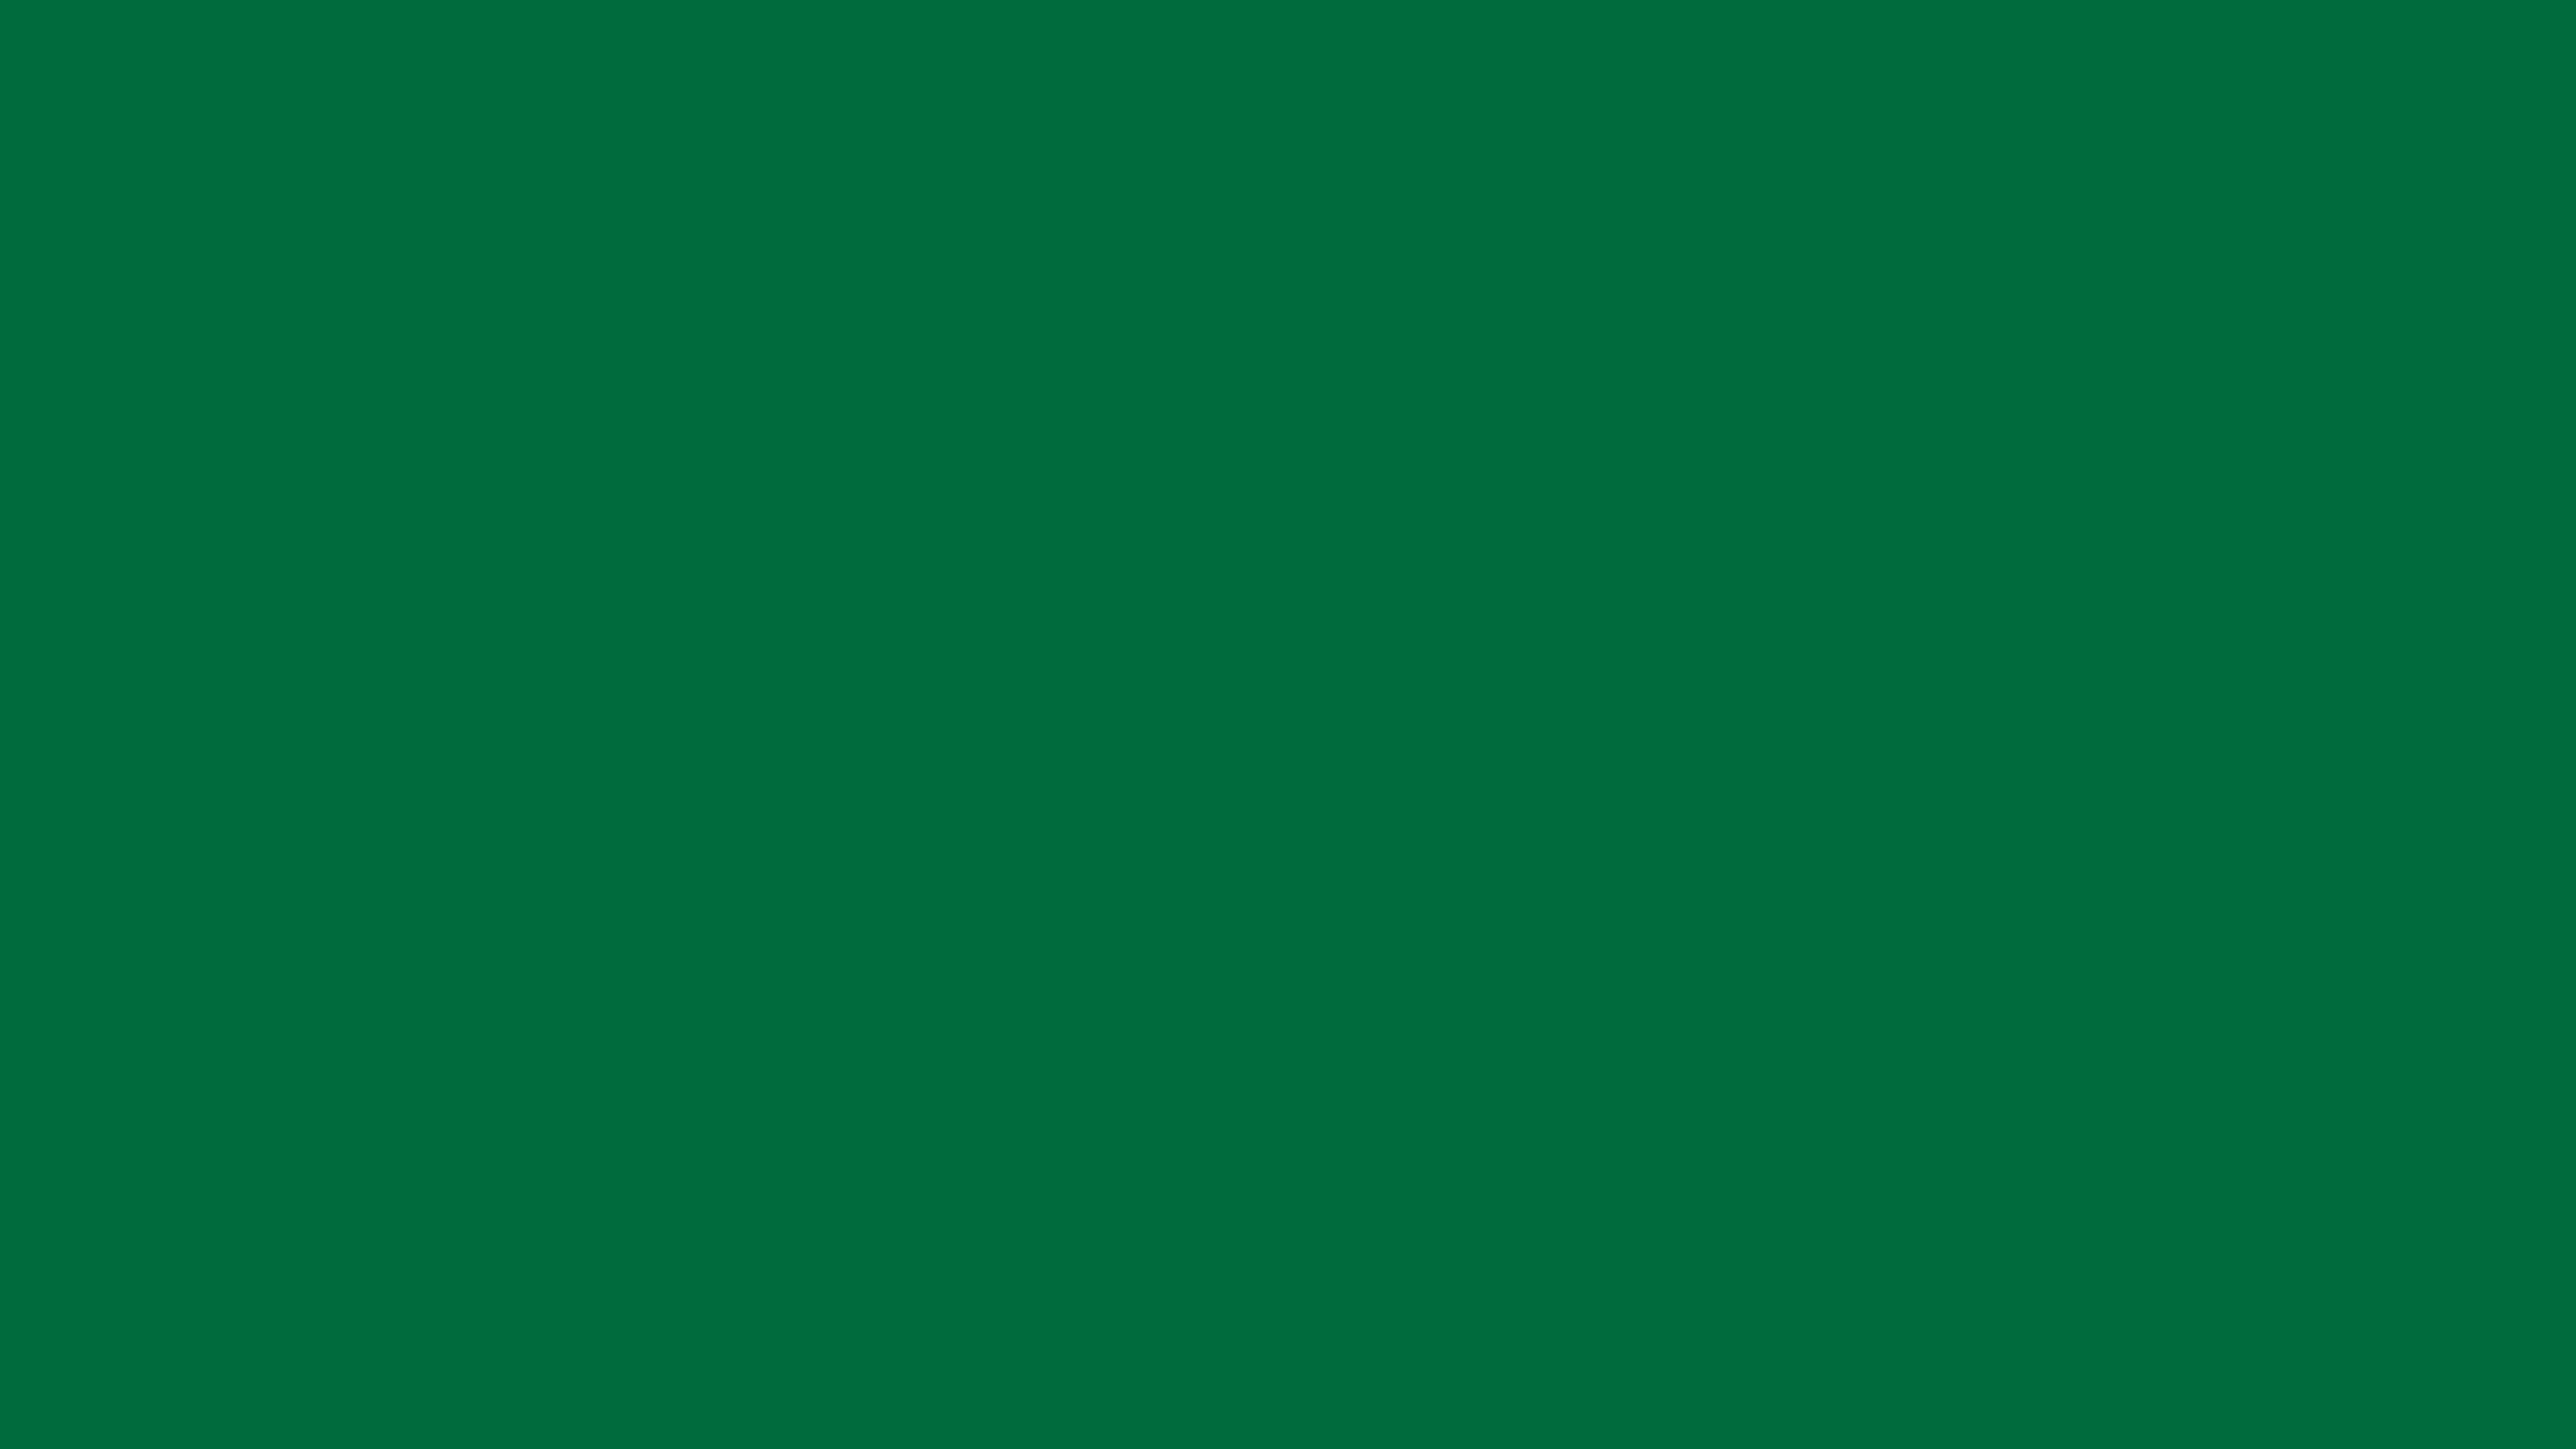 3840x2160 Cadmium Green Solid Color Background